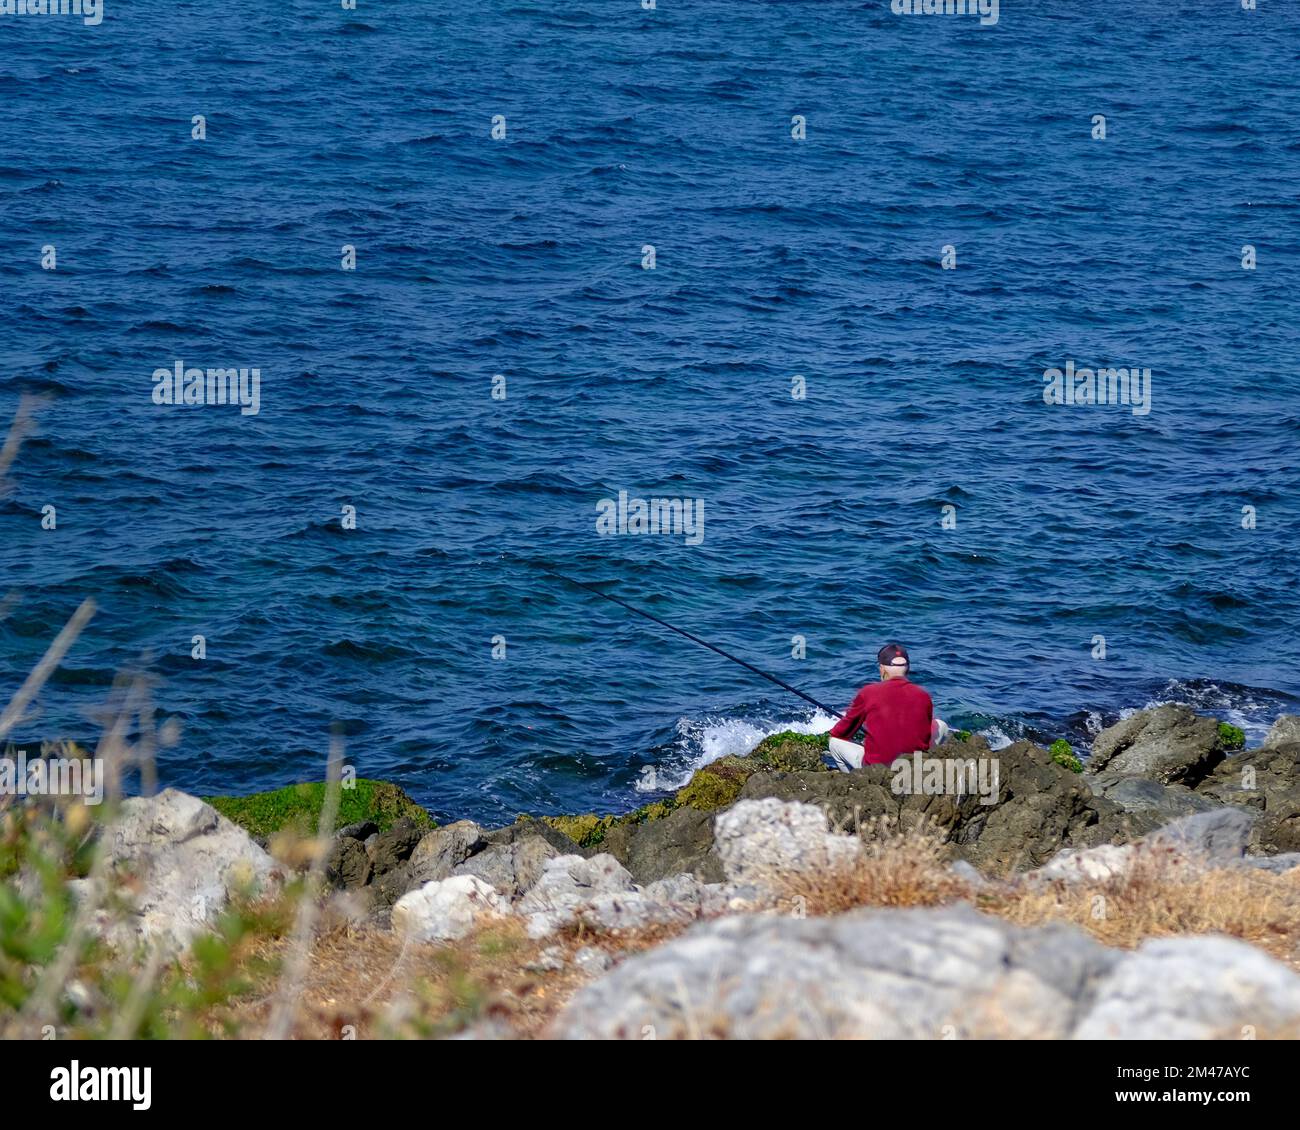 Fisherman photographed in front of sea at Greece Stock Photo